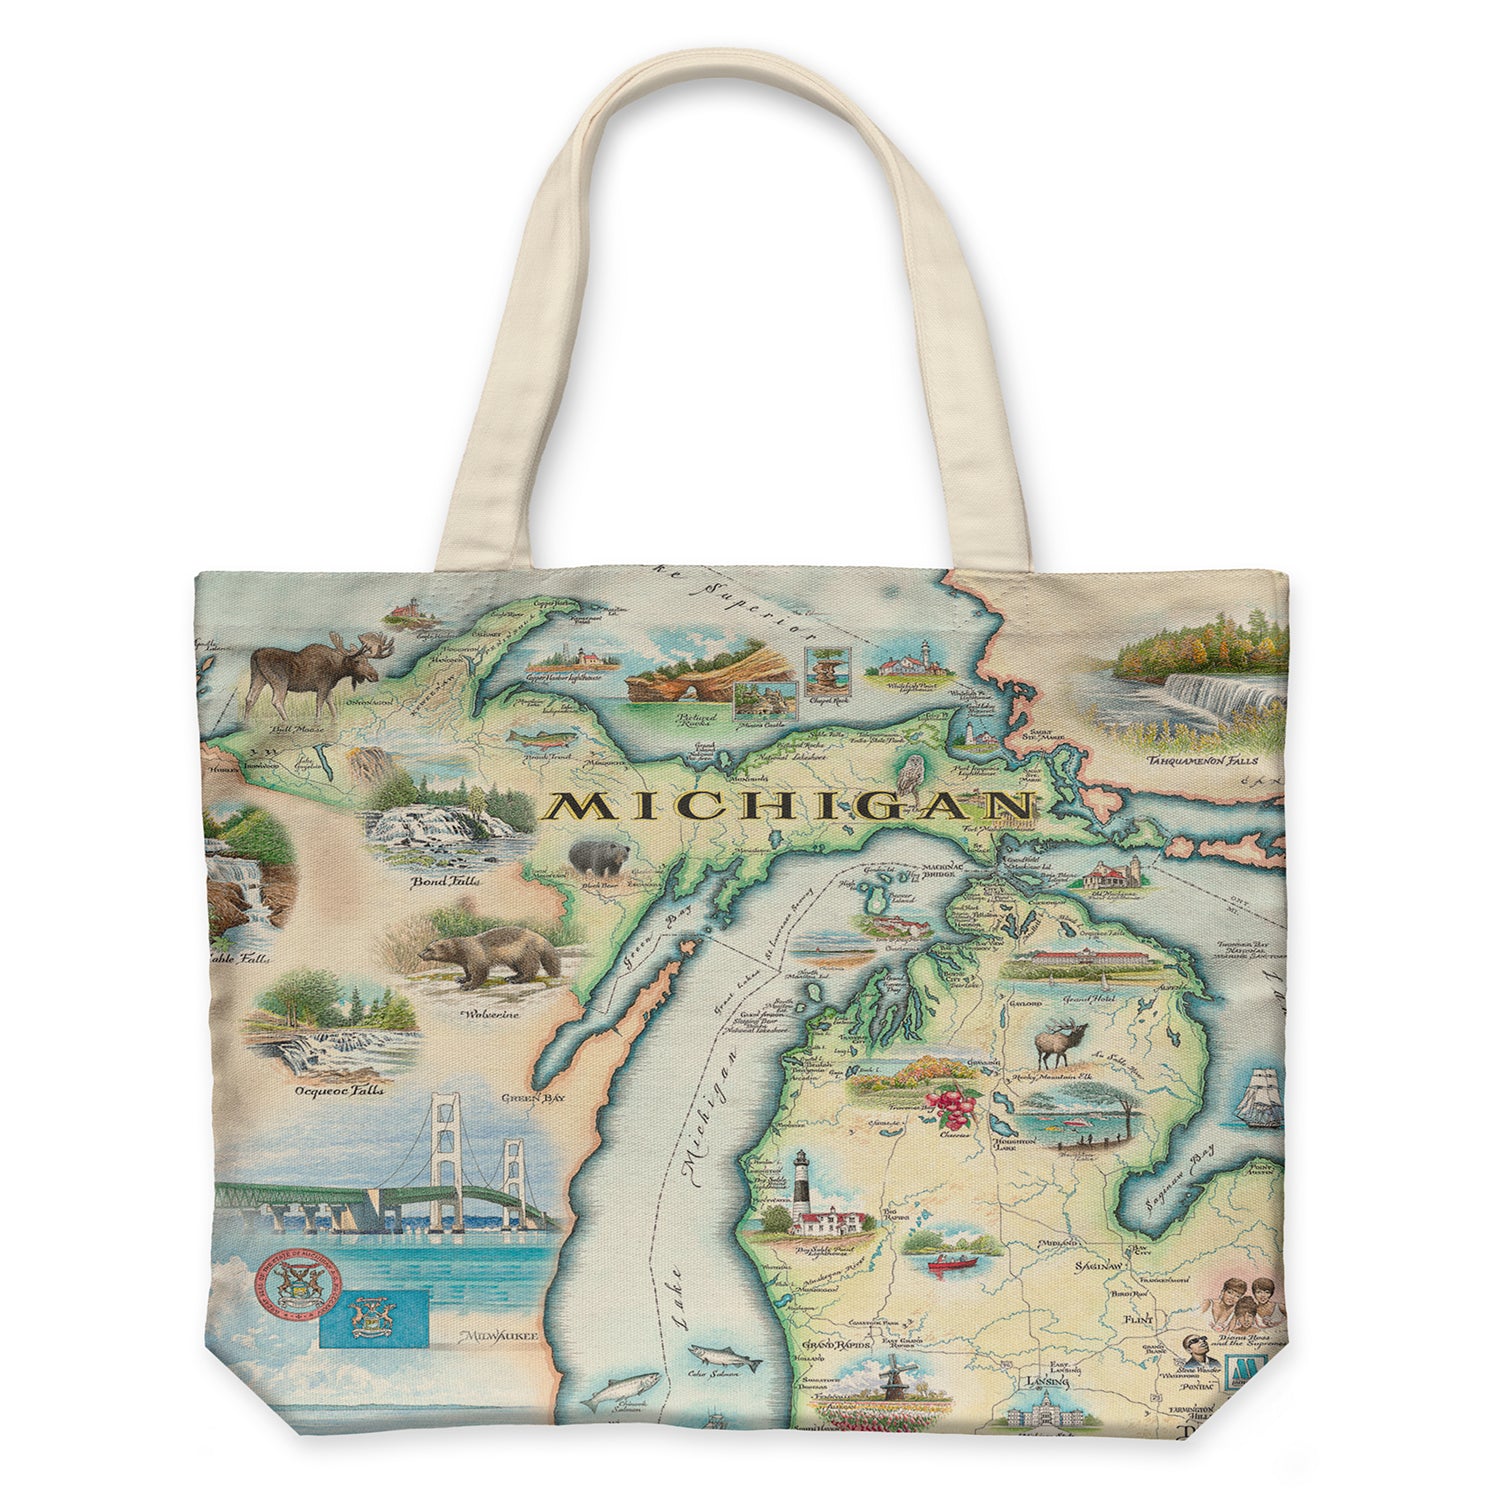 Michigan Canvas Tote Bags by Xplorer Maps. Featuring the Great Lakes, Detroit, Ann Arbor, Grand Rapids, and Lansing. The Print also features Nature, animals, ducks, deer, fish, moose lighthouses, wolverines, and the Mackinac Bridge.